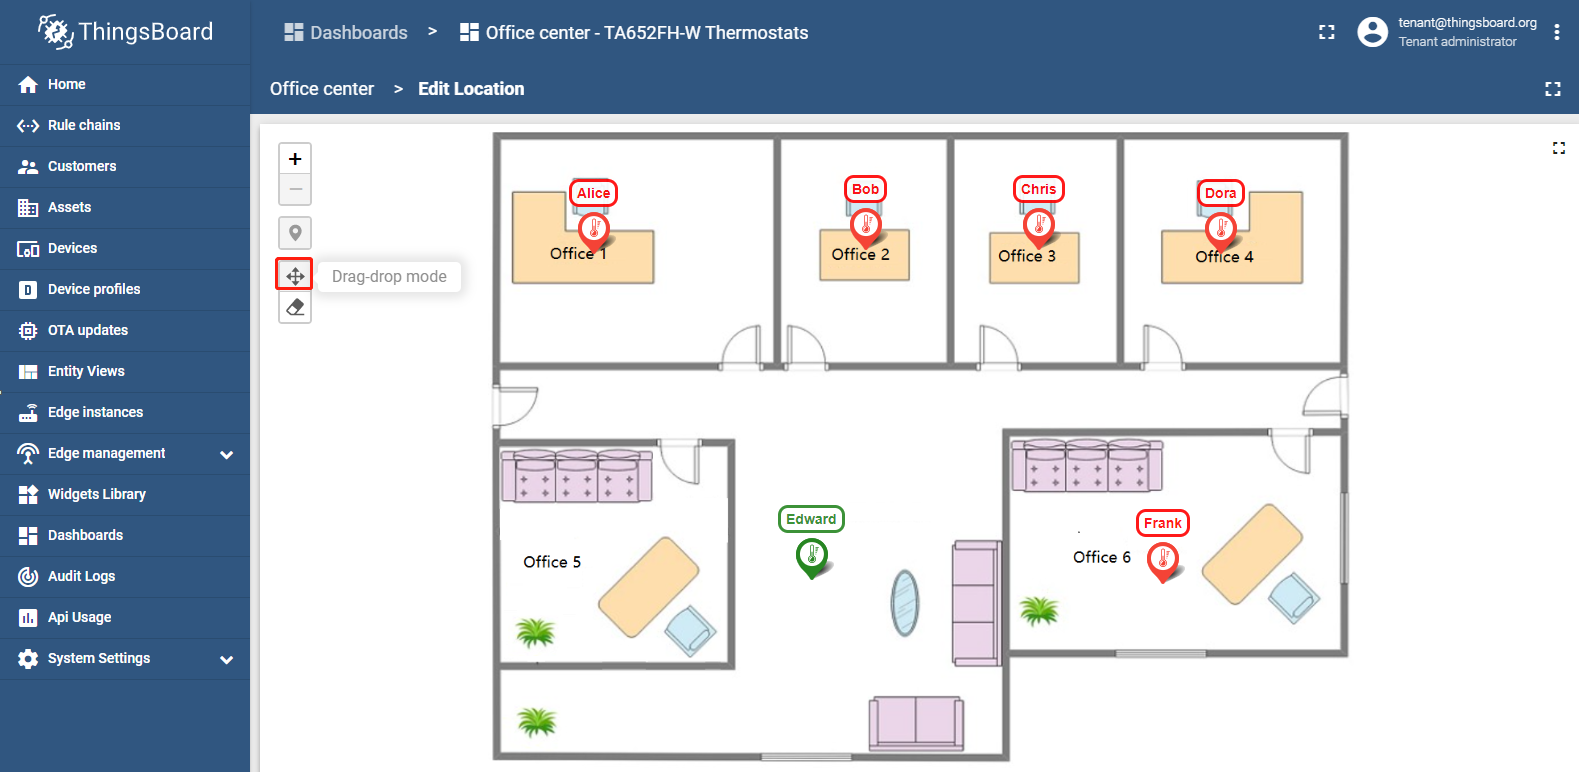 ../../_images/office-center-dashboard-map-state-1.png